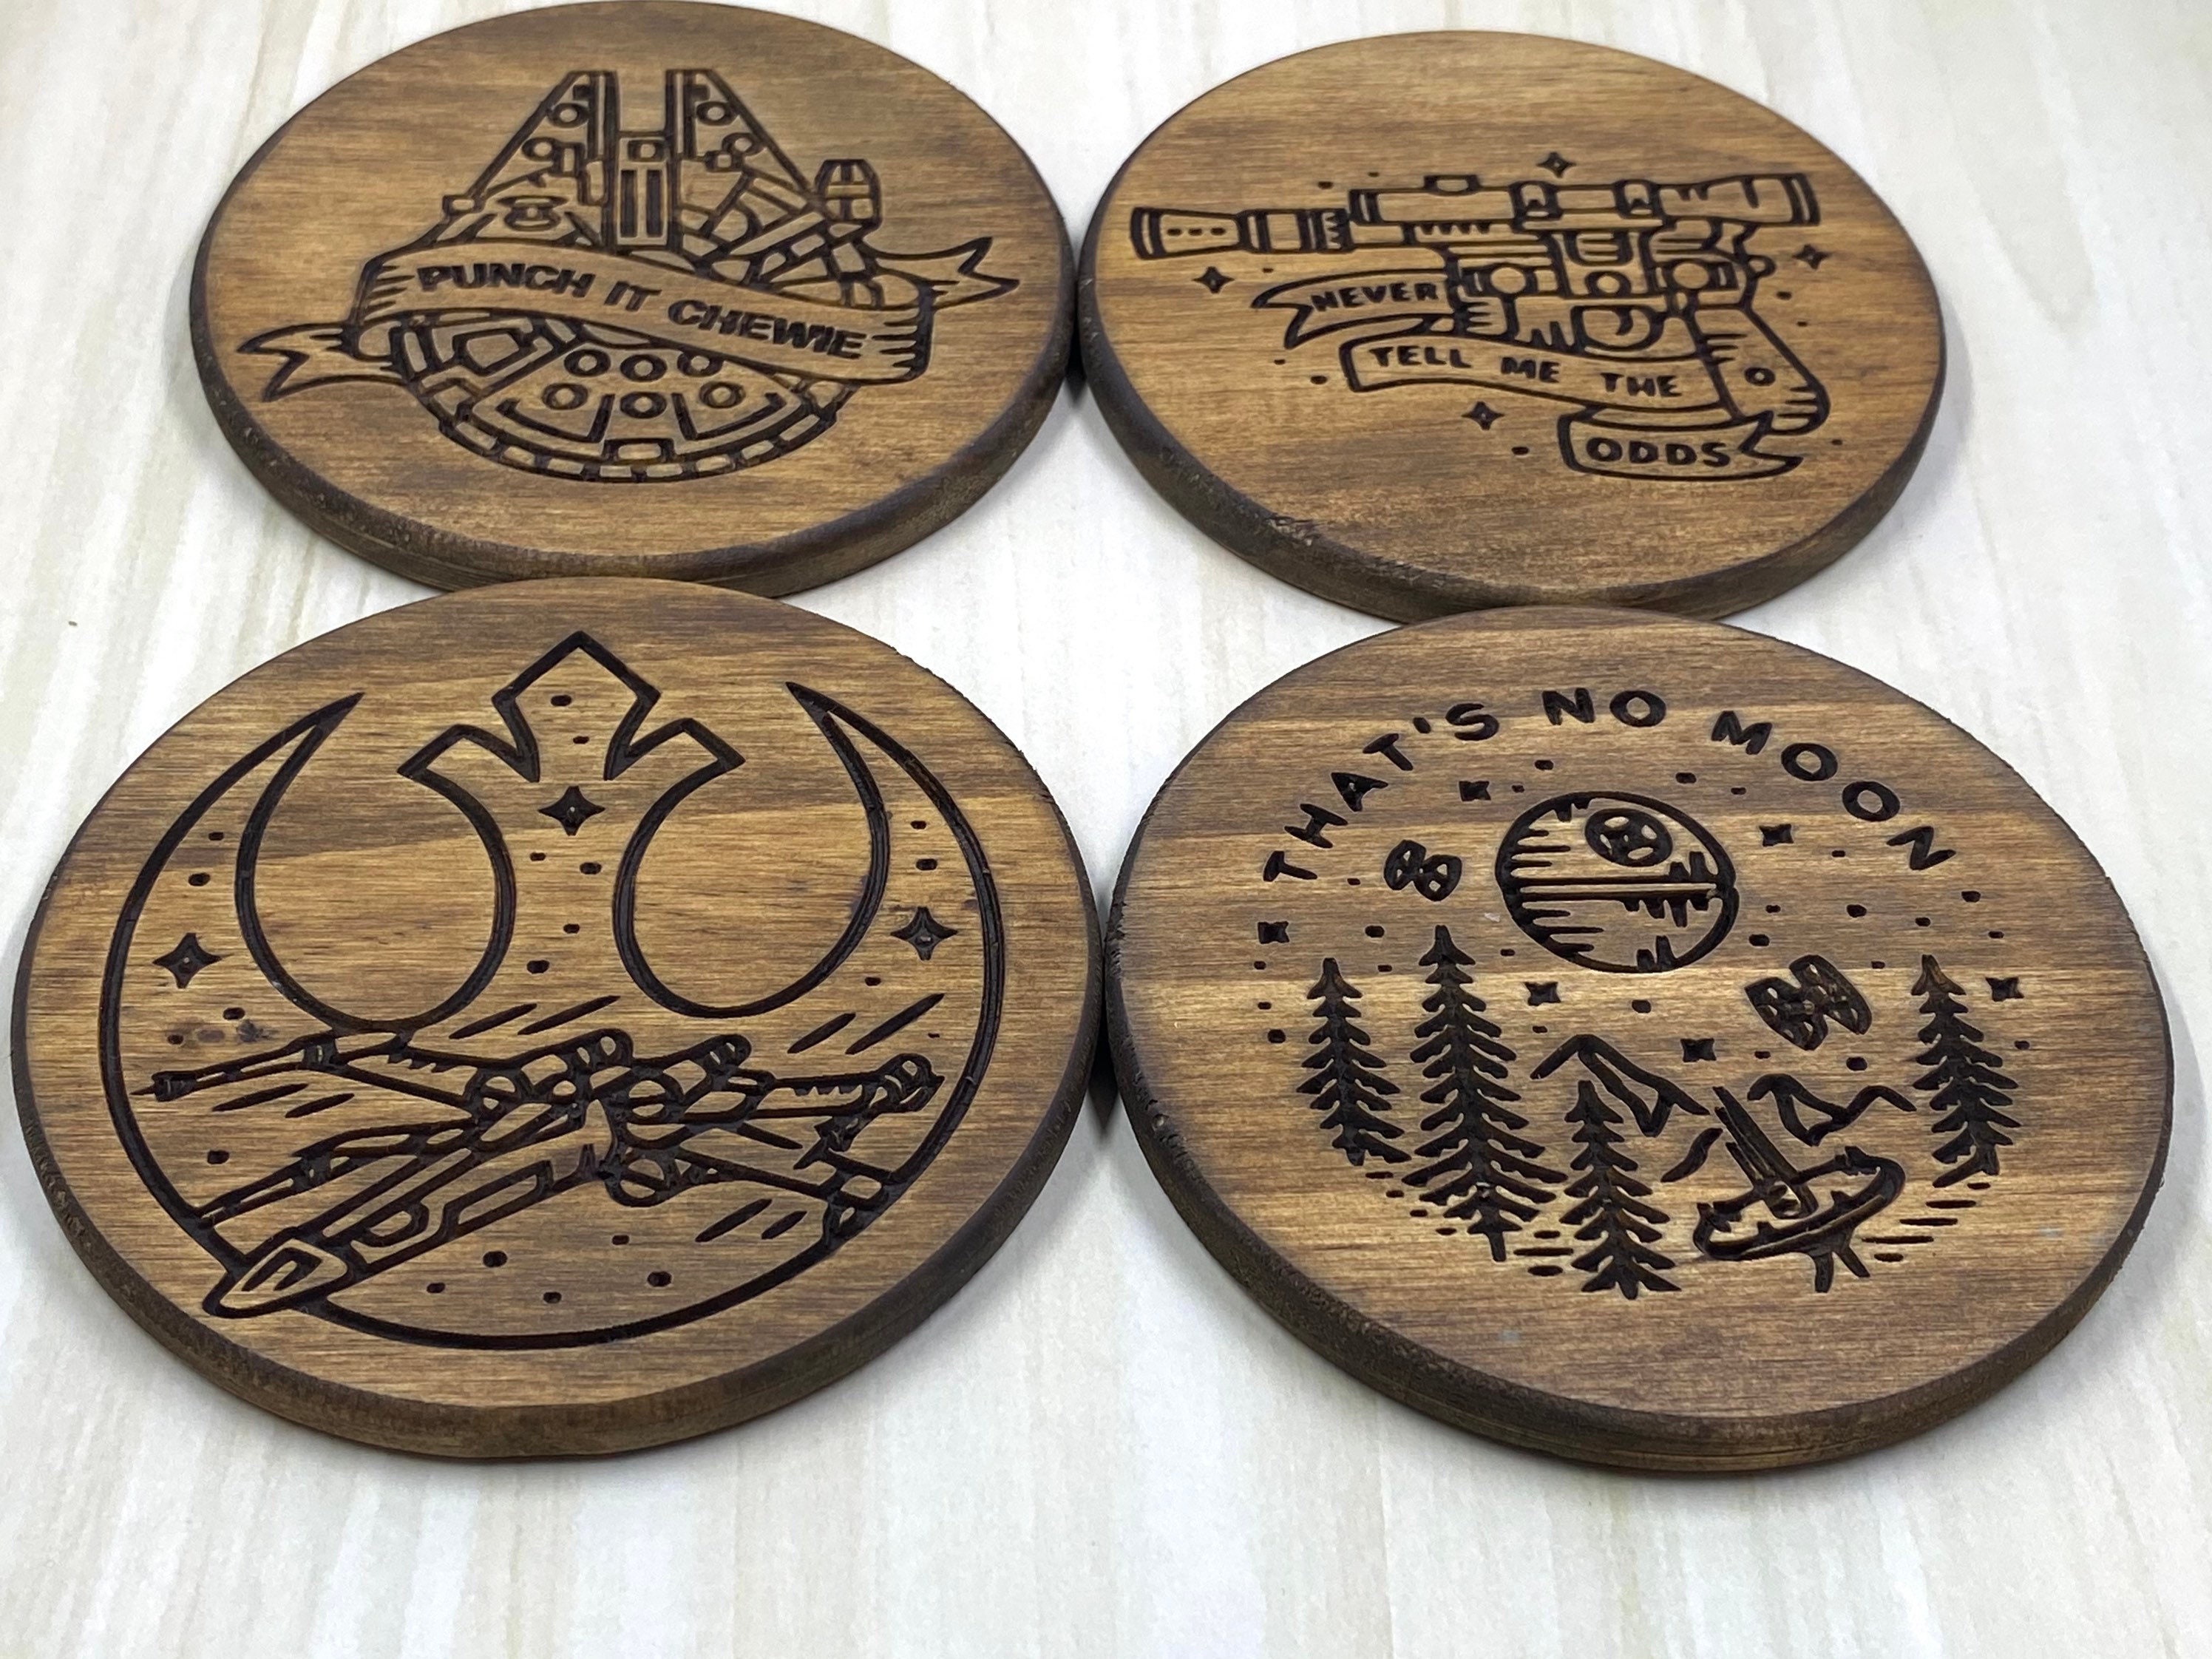 Star Wars Inspired Coasters